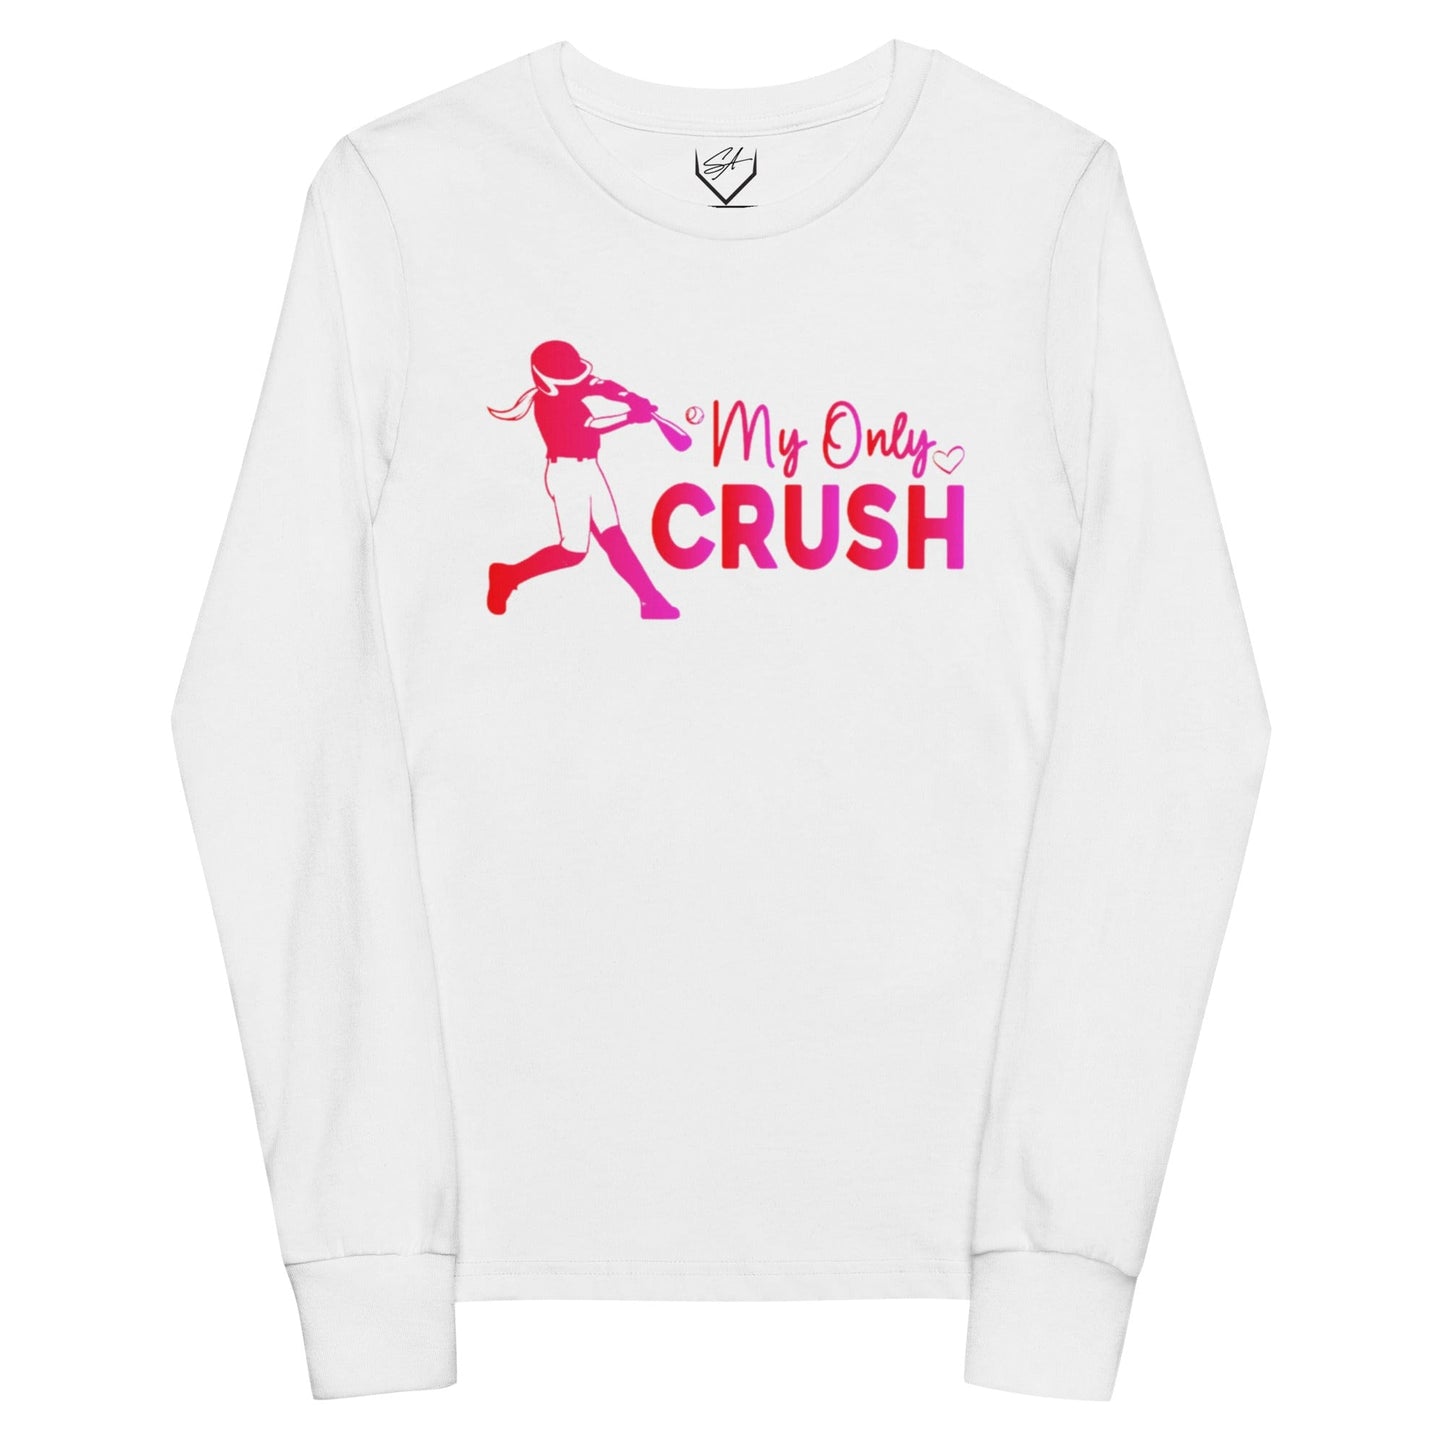 My Only Crush - Youth Long Sleeve